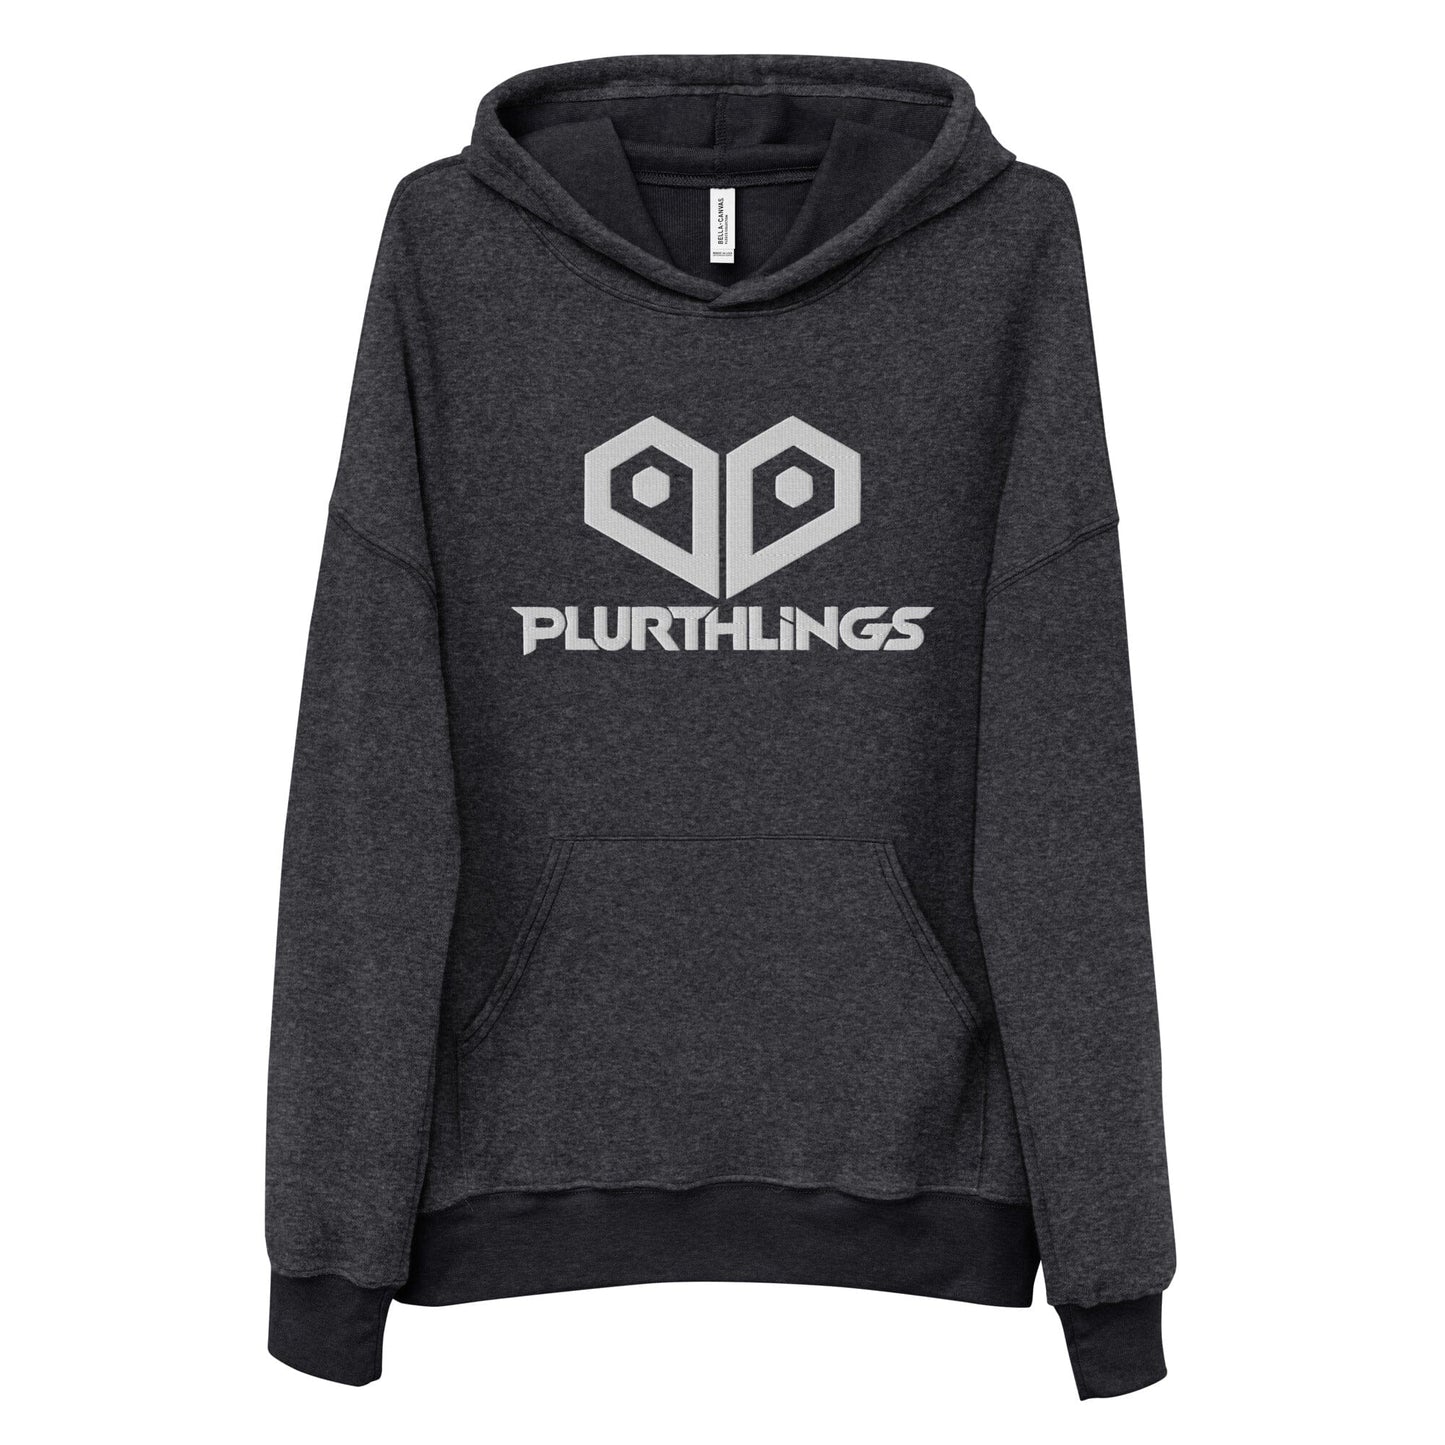 Plurthlings Embroidered White Heart Eco-Sueded Fleece Hoodie PLURTHLINGS 